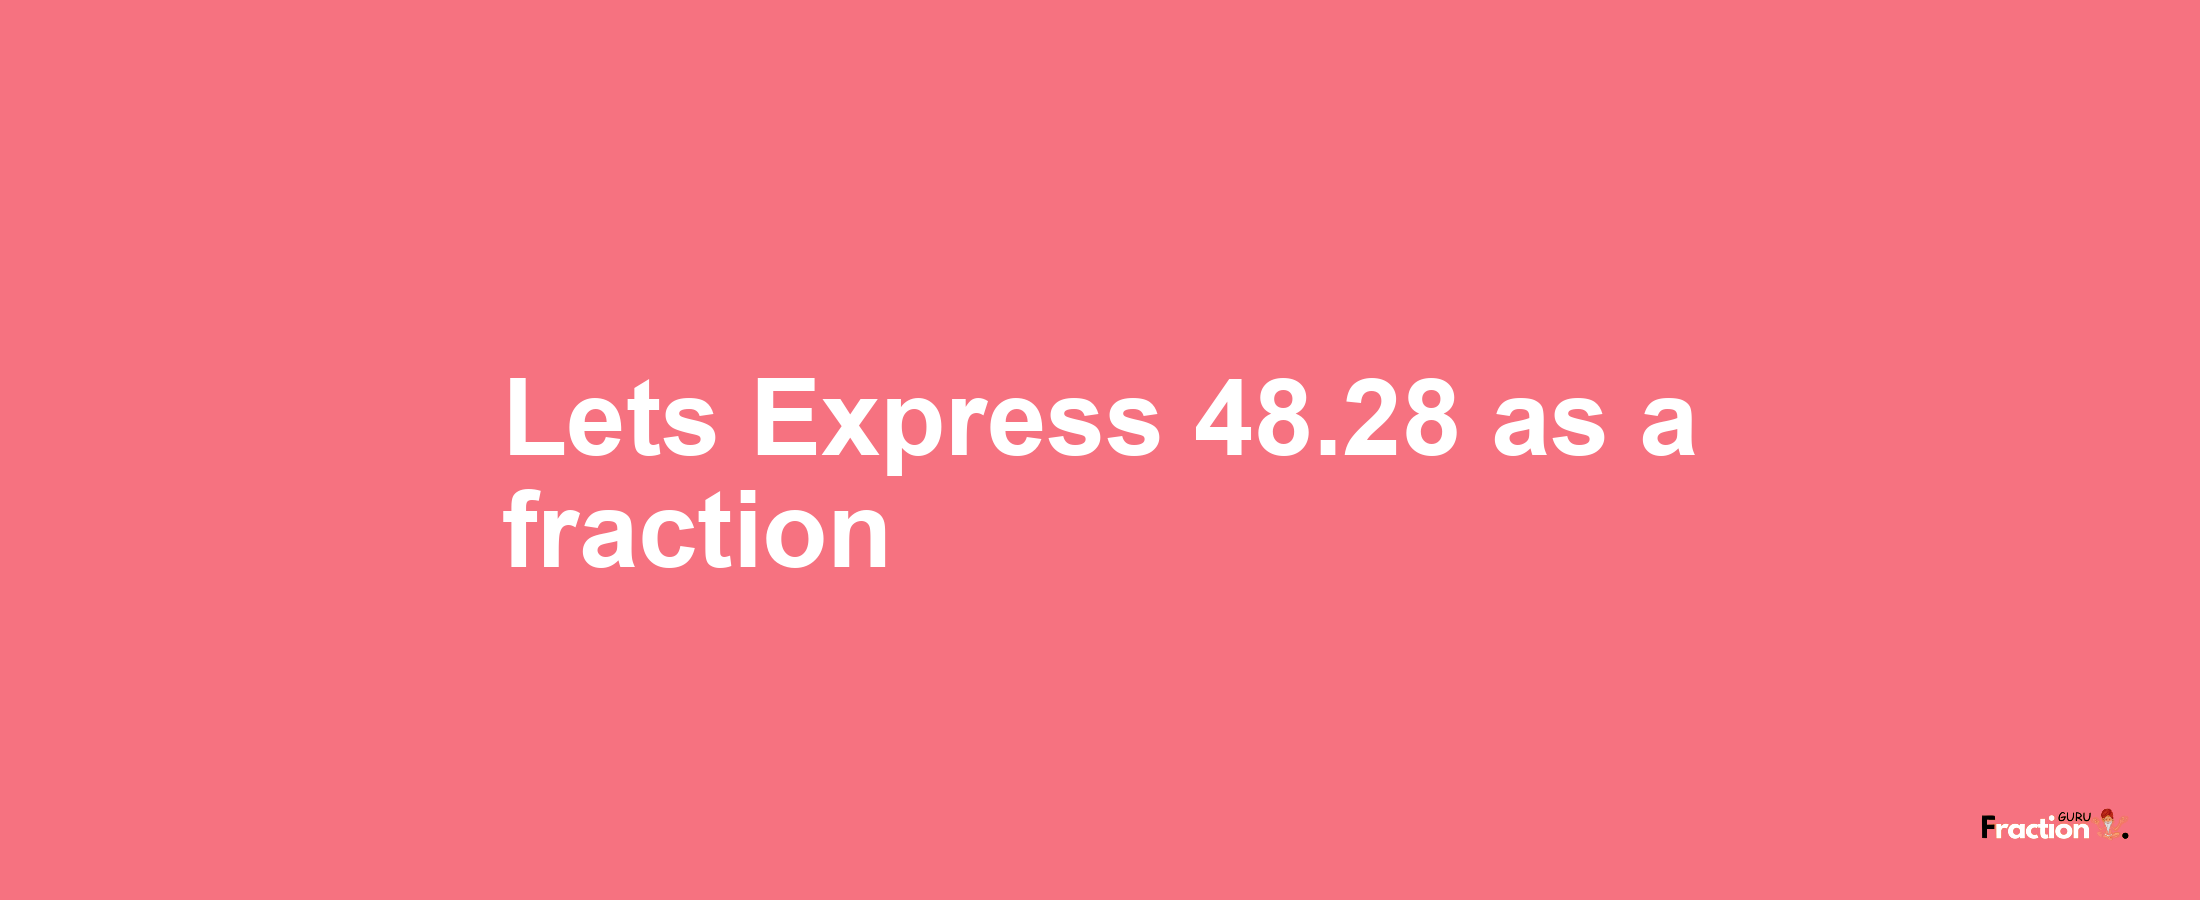 Lets Express 48.28 as afraction